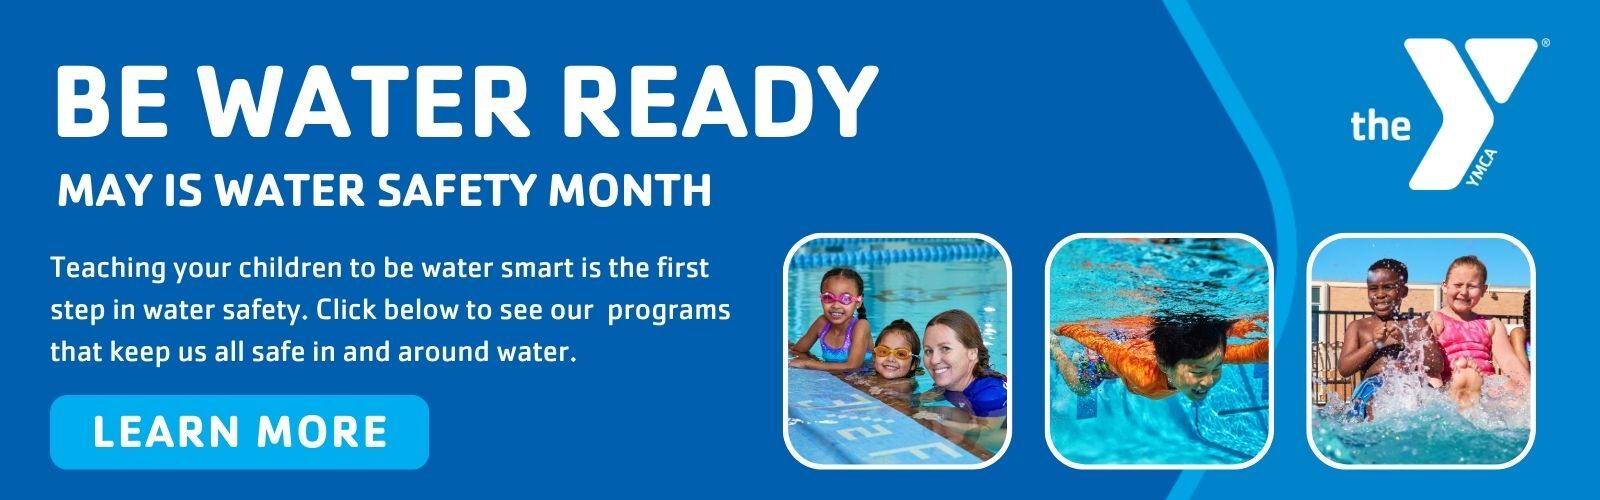 Water_Safety_Month_-_BE_WATER_READY.jpg